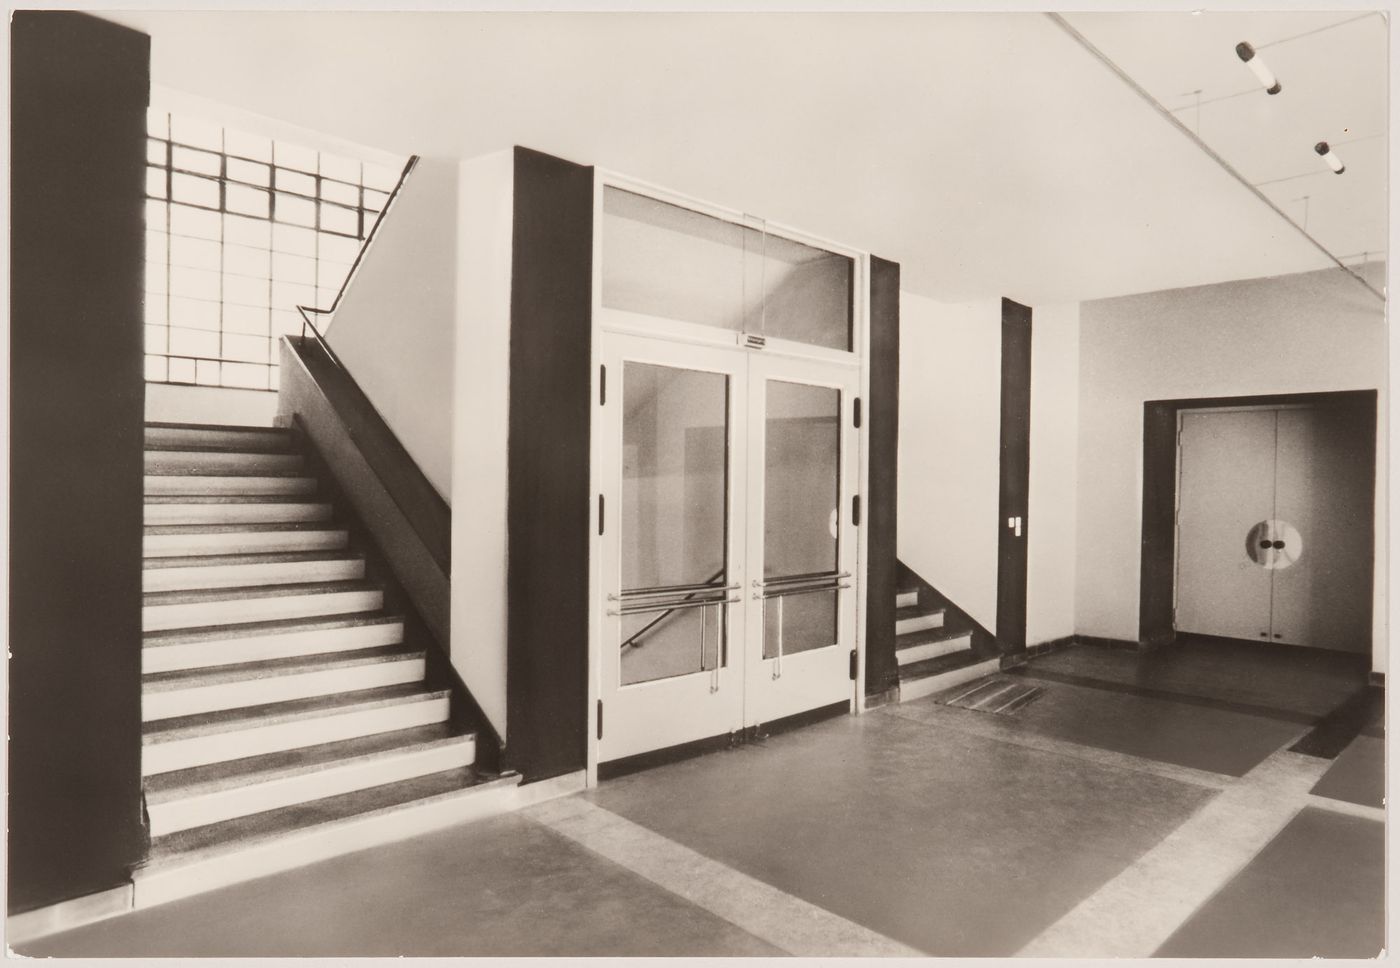 Interior view of the workshop wing of the Bauhaus building showing the vestibule doors and stairs, Dessau, Germany